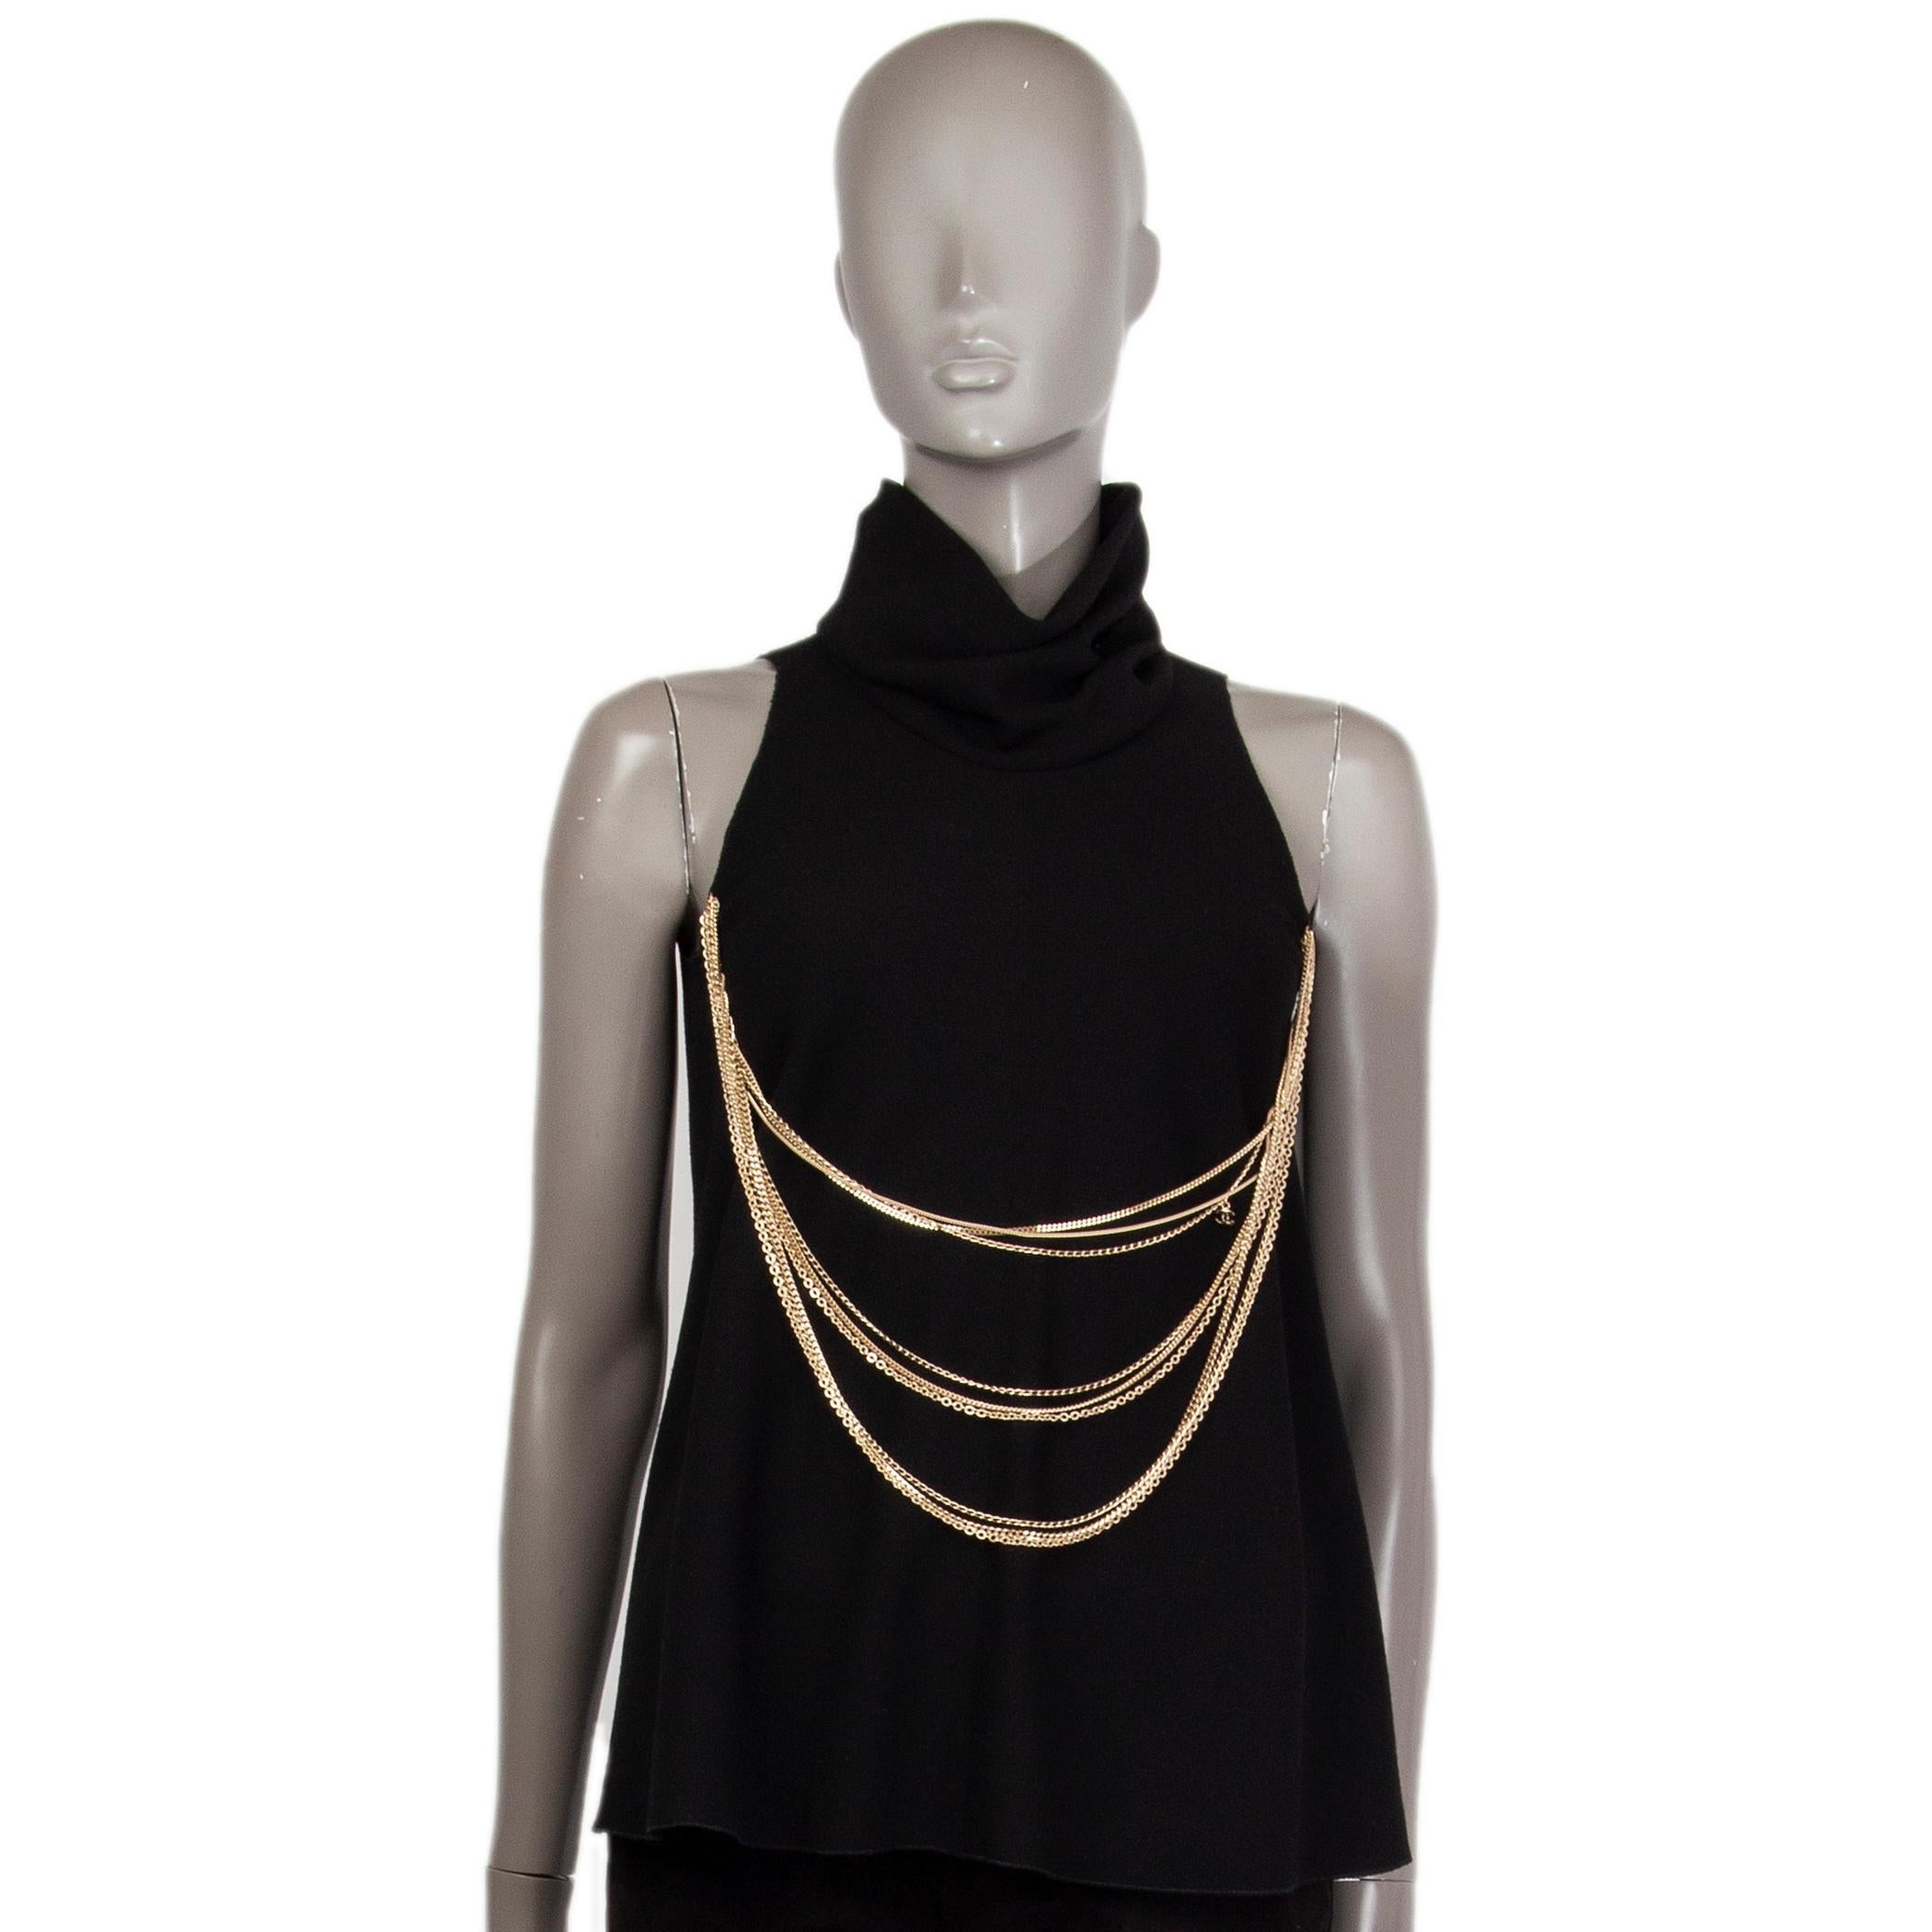 Chanel cowl-neck top in black wool (100%). With gold toned chain. Closes on the back with concealed metal hooks. Unlined. Has been worn and is in excellent condition. 

Tag Size 38
Size S
Shoulder Width 25cm (9.8in)
Bust 82cm (32in) to 88cm